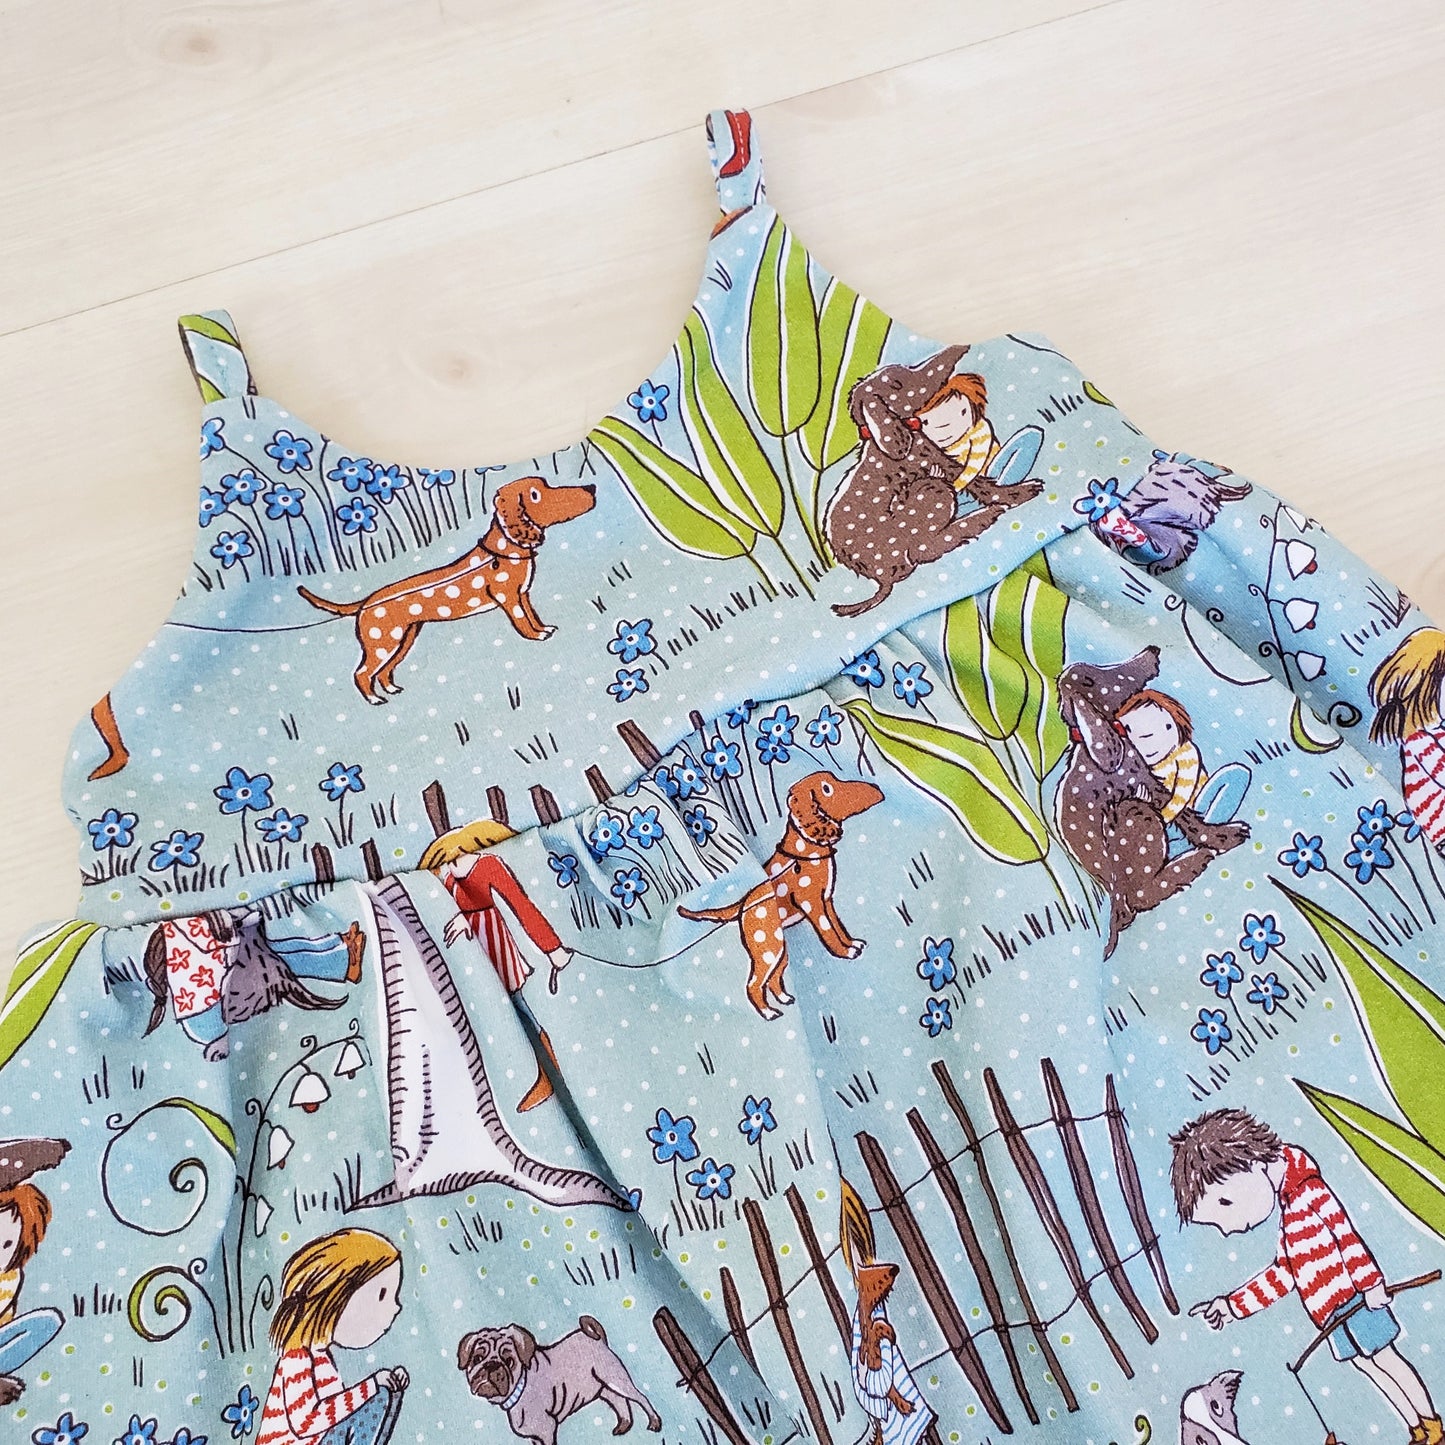 Limited Edition Organic Toddler and Children's Romper